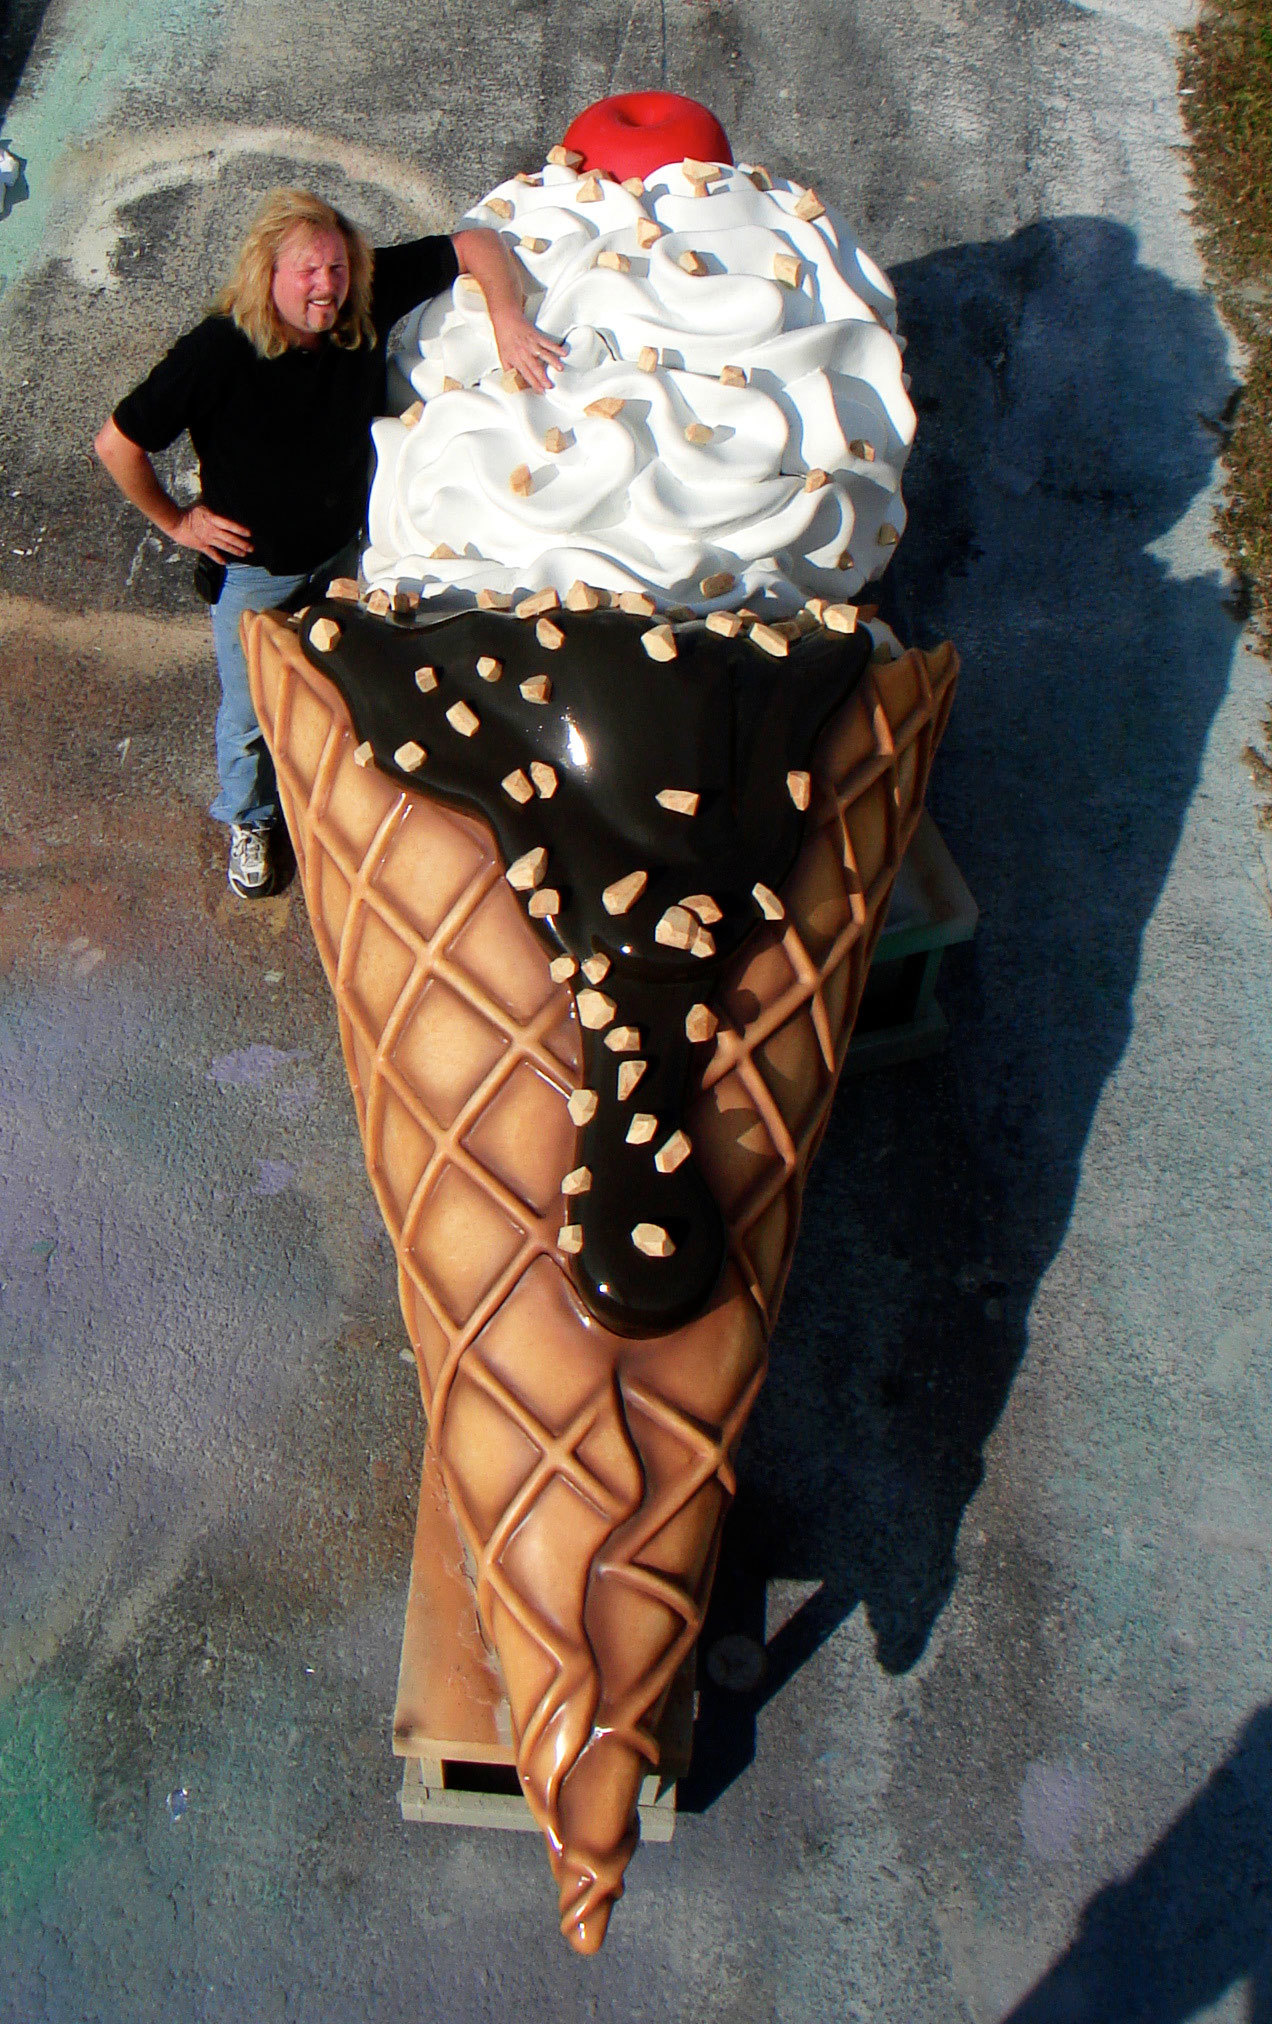 Bruce Barry with a larger than life 3D Sculpted Ice Cream Cone